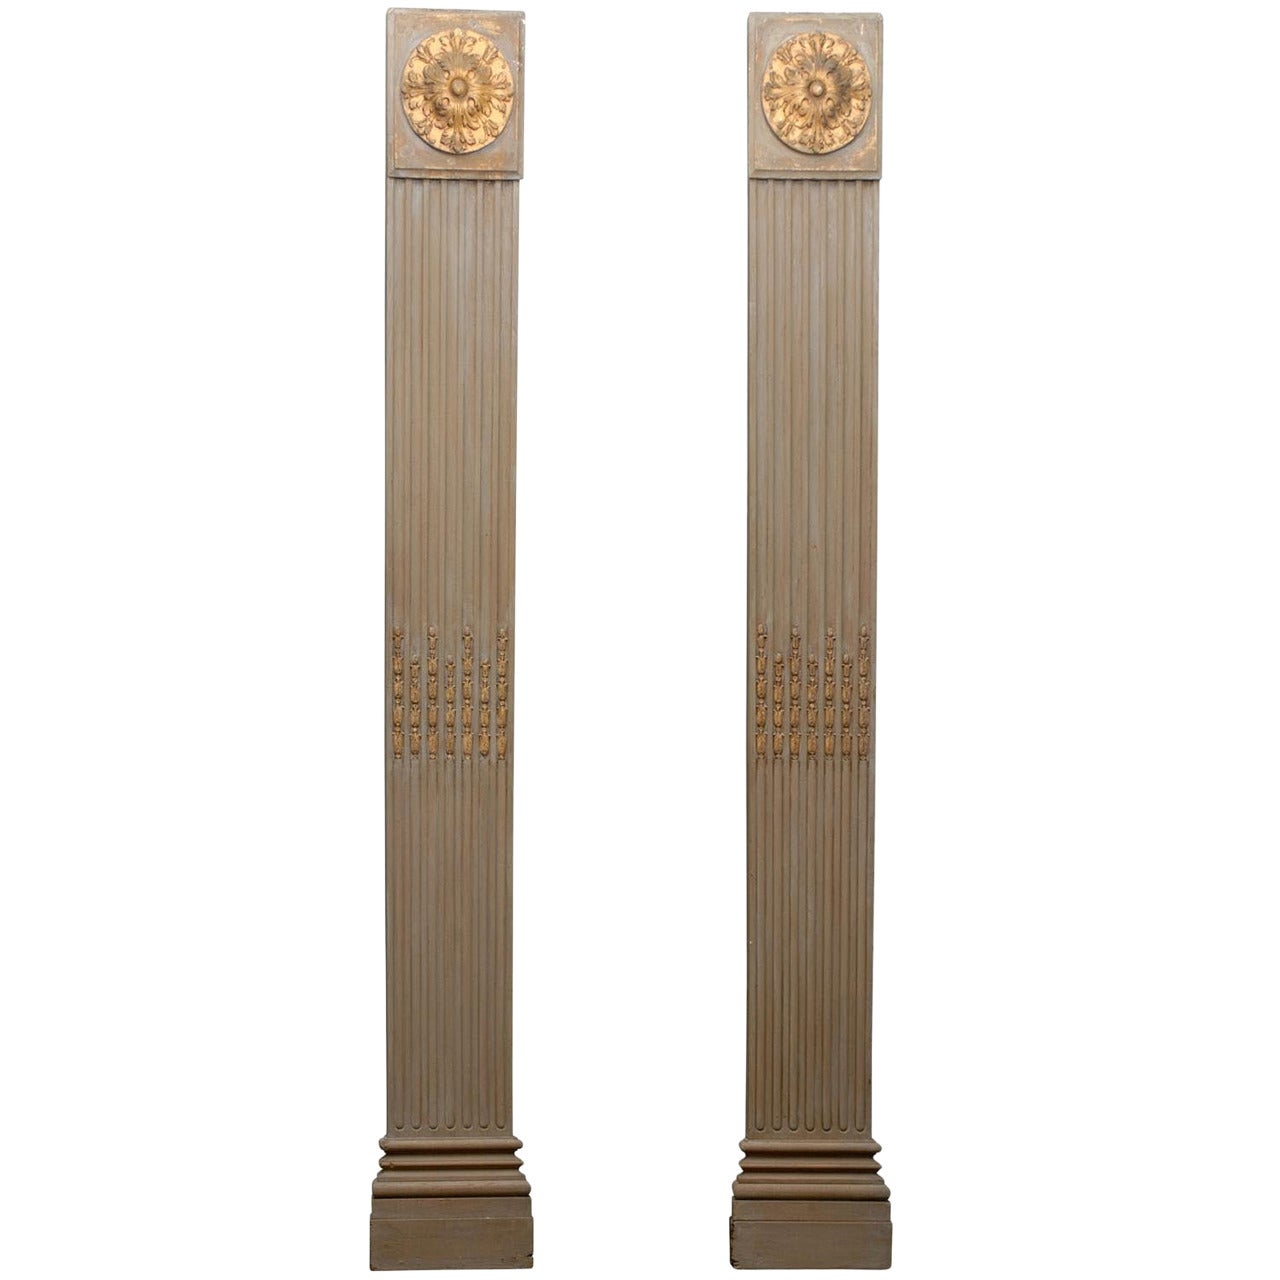 Pair of 19th Century Italian Painted and Gilded Pilasters with Gilded Medallions